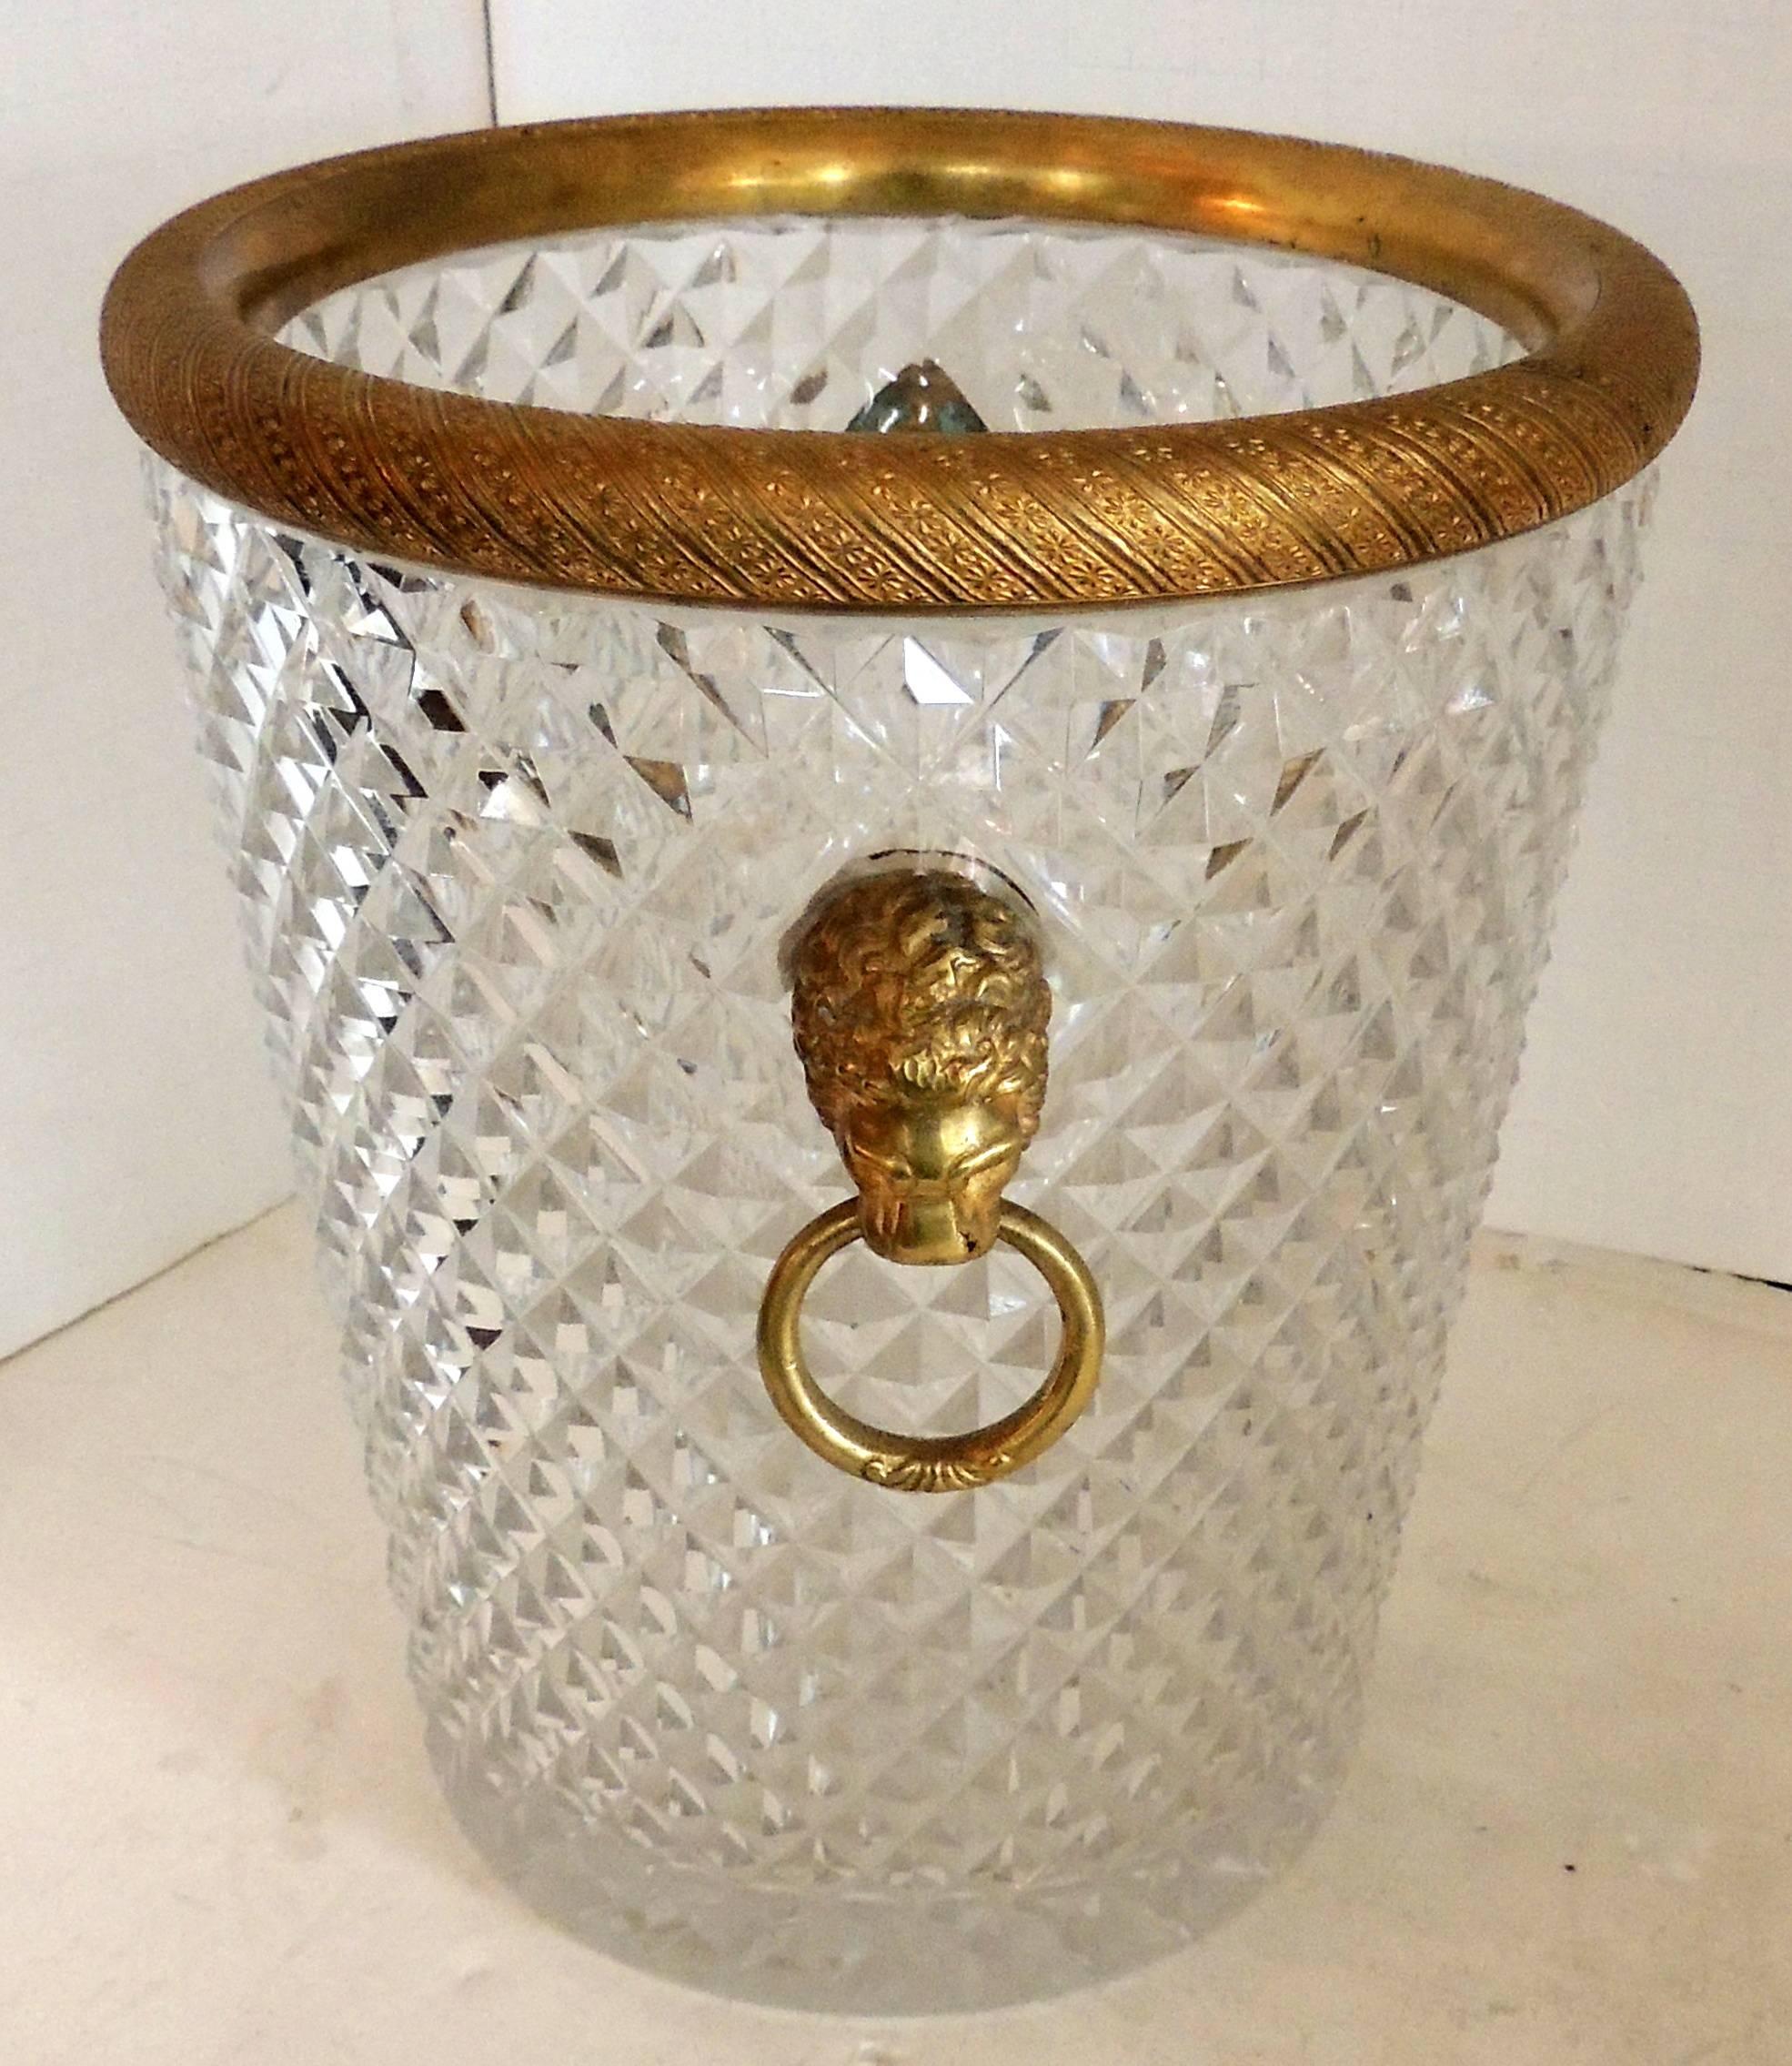 Elegant and very fine french neoclassical baccarat style lion handle doré bronze ormolu mounted and diamond cut crystal ice/champagne bucket.
Unsigned.